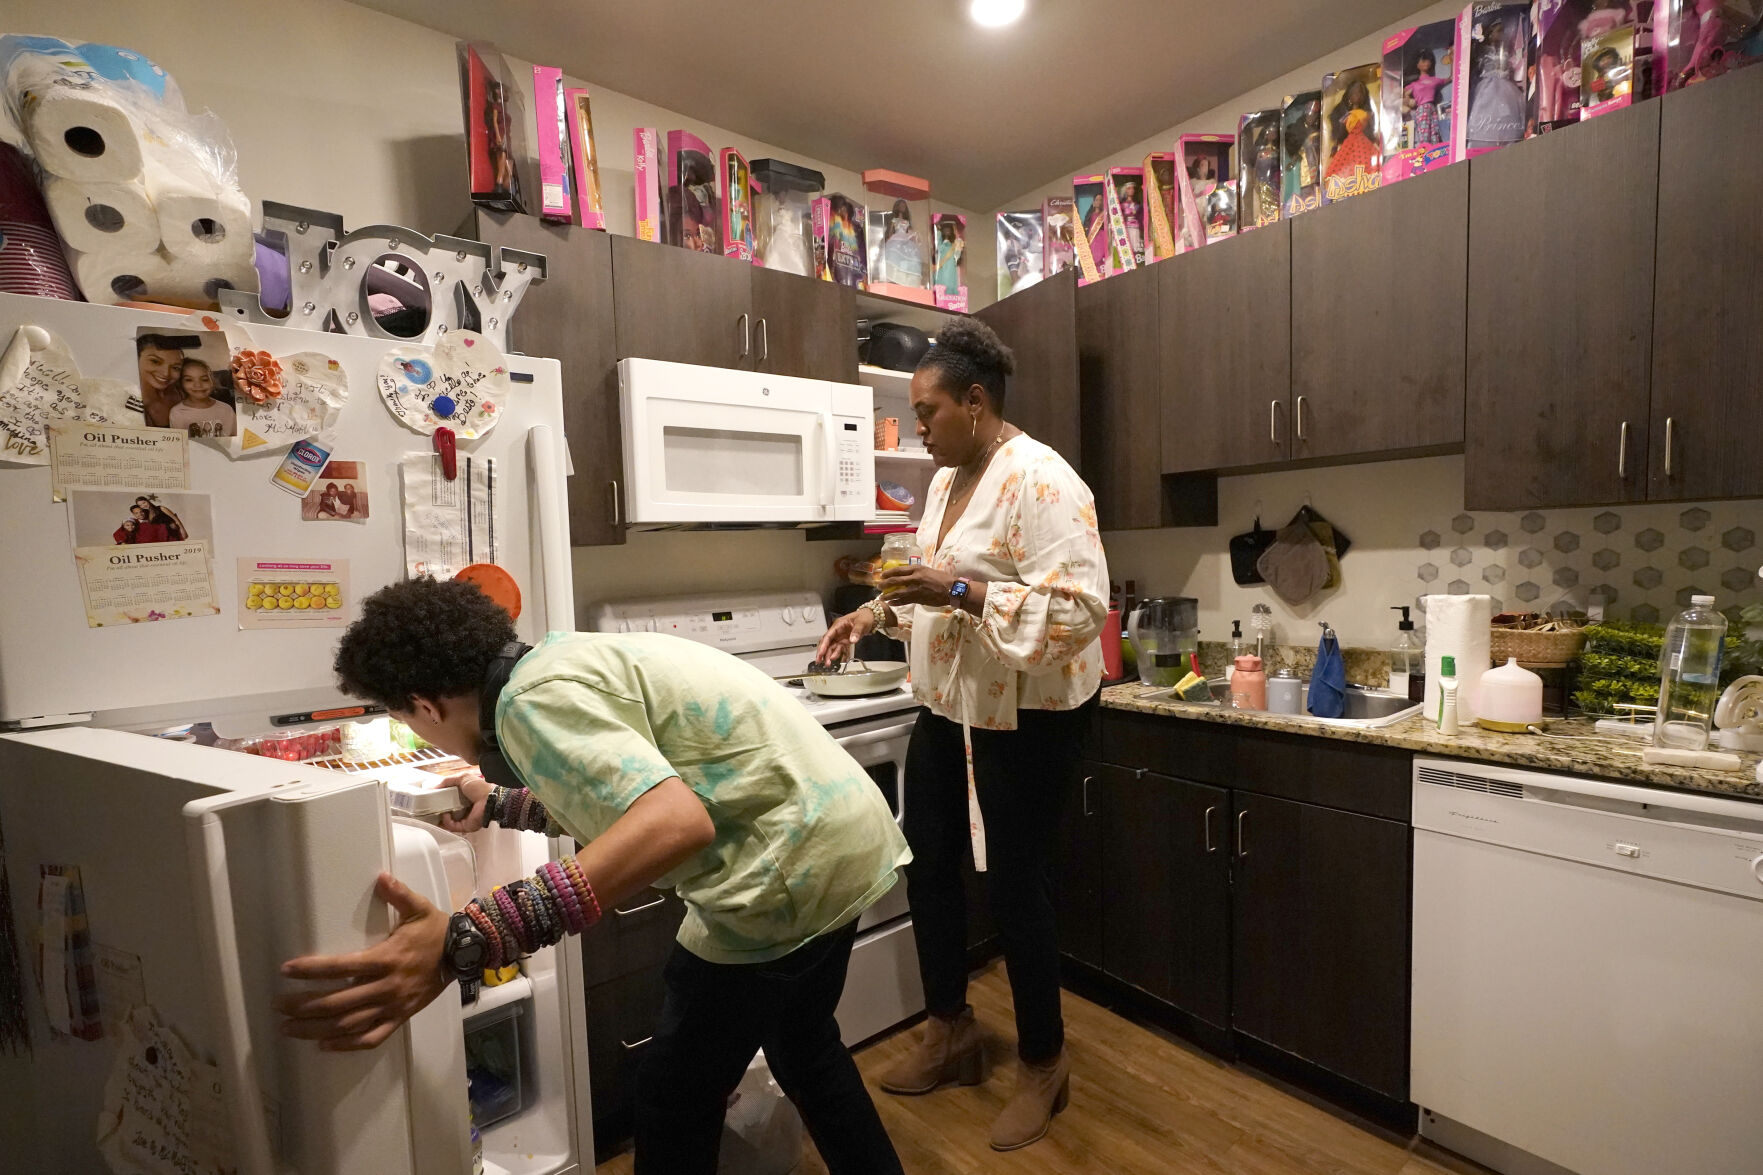 <p>Miles Fallon, left, and his mother, Marla Williams, work in the kitchen as she prepares dinner at their home in Chicago, Wednesday, Oct. 12, 2022. During remote learning, Williams says Miles lost motivation and wouldn’t do his assignments. Once he went back on a hybrid schedule in spring 2021, he started doing well again, she says. (AP Photo/Charles Rex Arbogast)</p>   PHOTO CREDIT: Charles Rex Arbogast - staff, AP